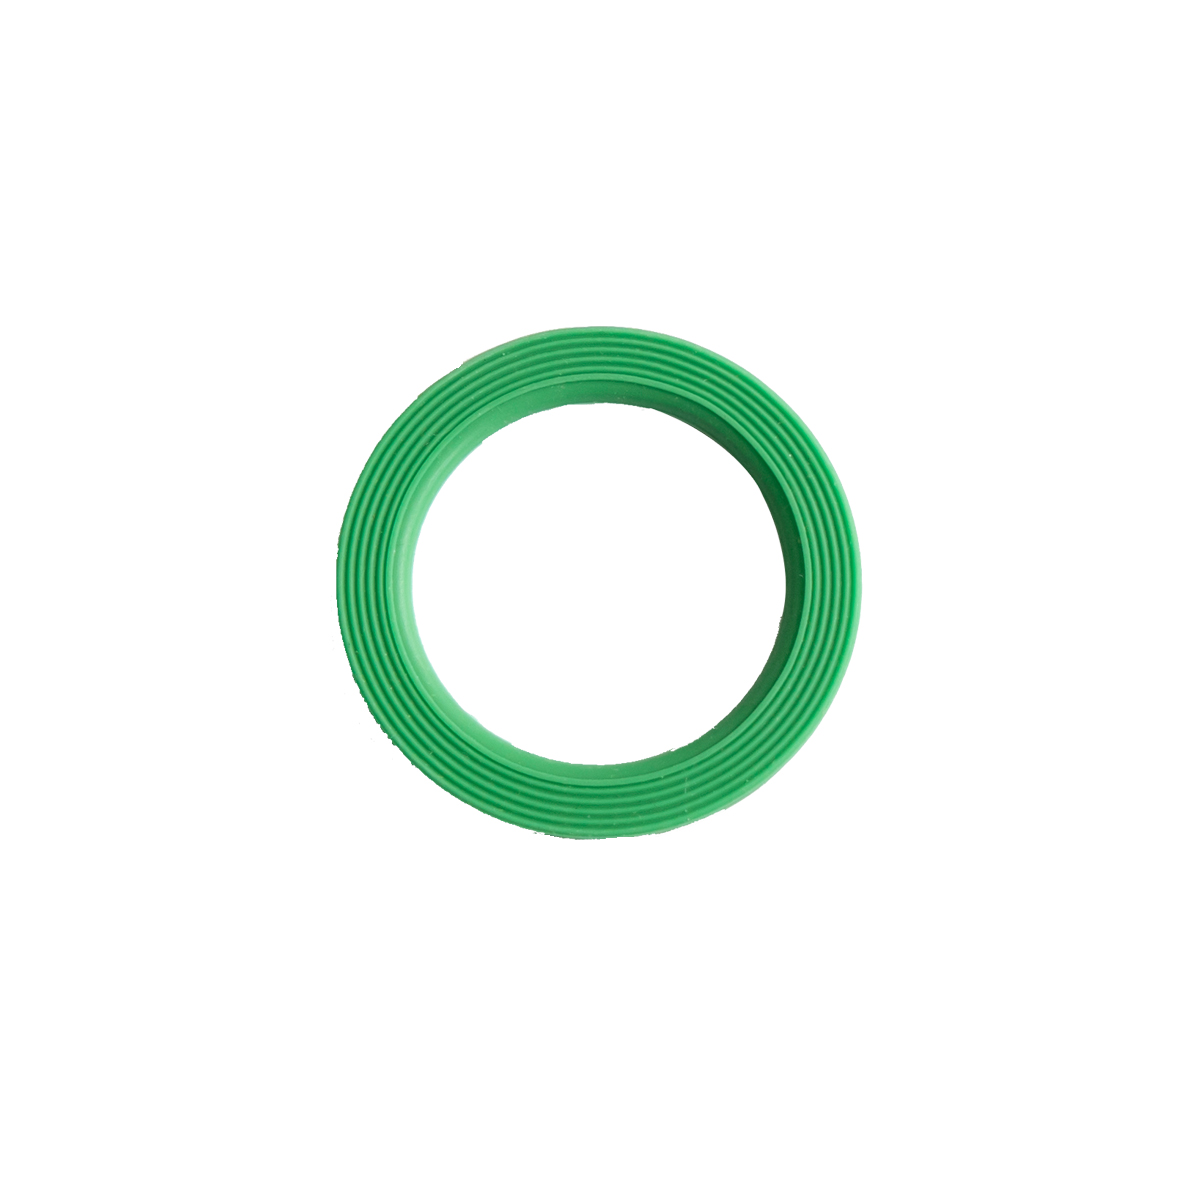 Replacement Thermomix Bimby VORWERK TM6 TM5 Spare Parts Blender of Green Seal Gasket Ring shim With Silicone material Accessory